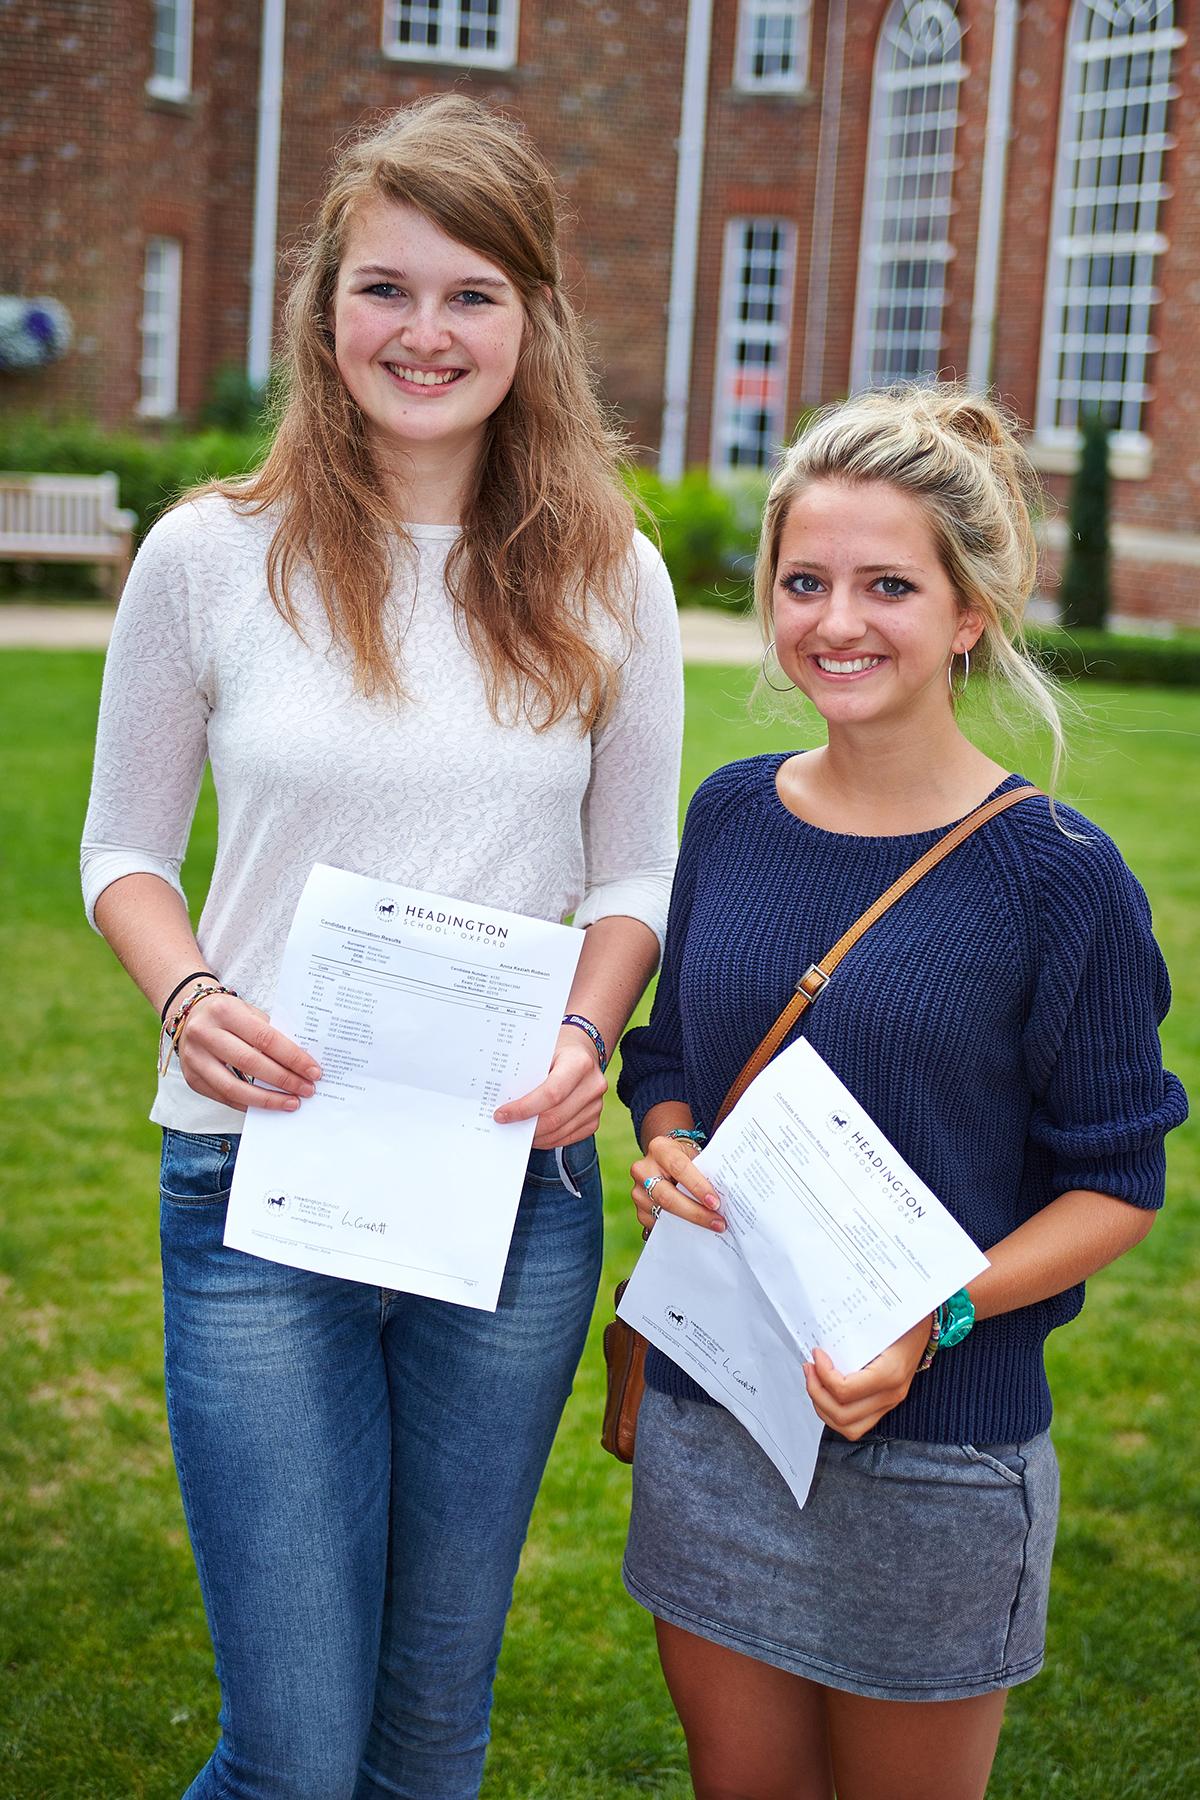 Pictures from around the counties school of student collecting their A-Level results